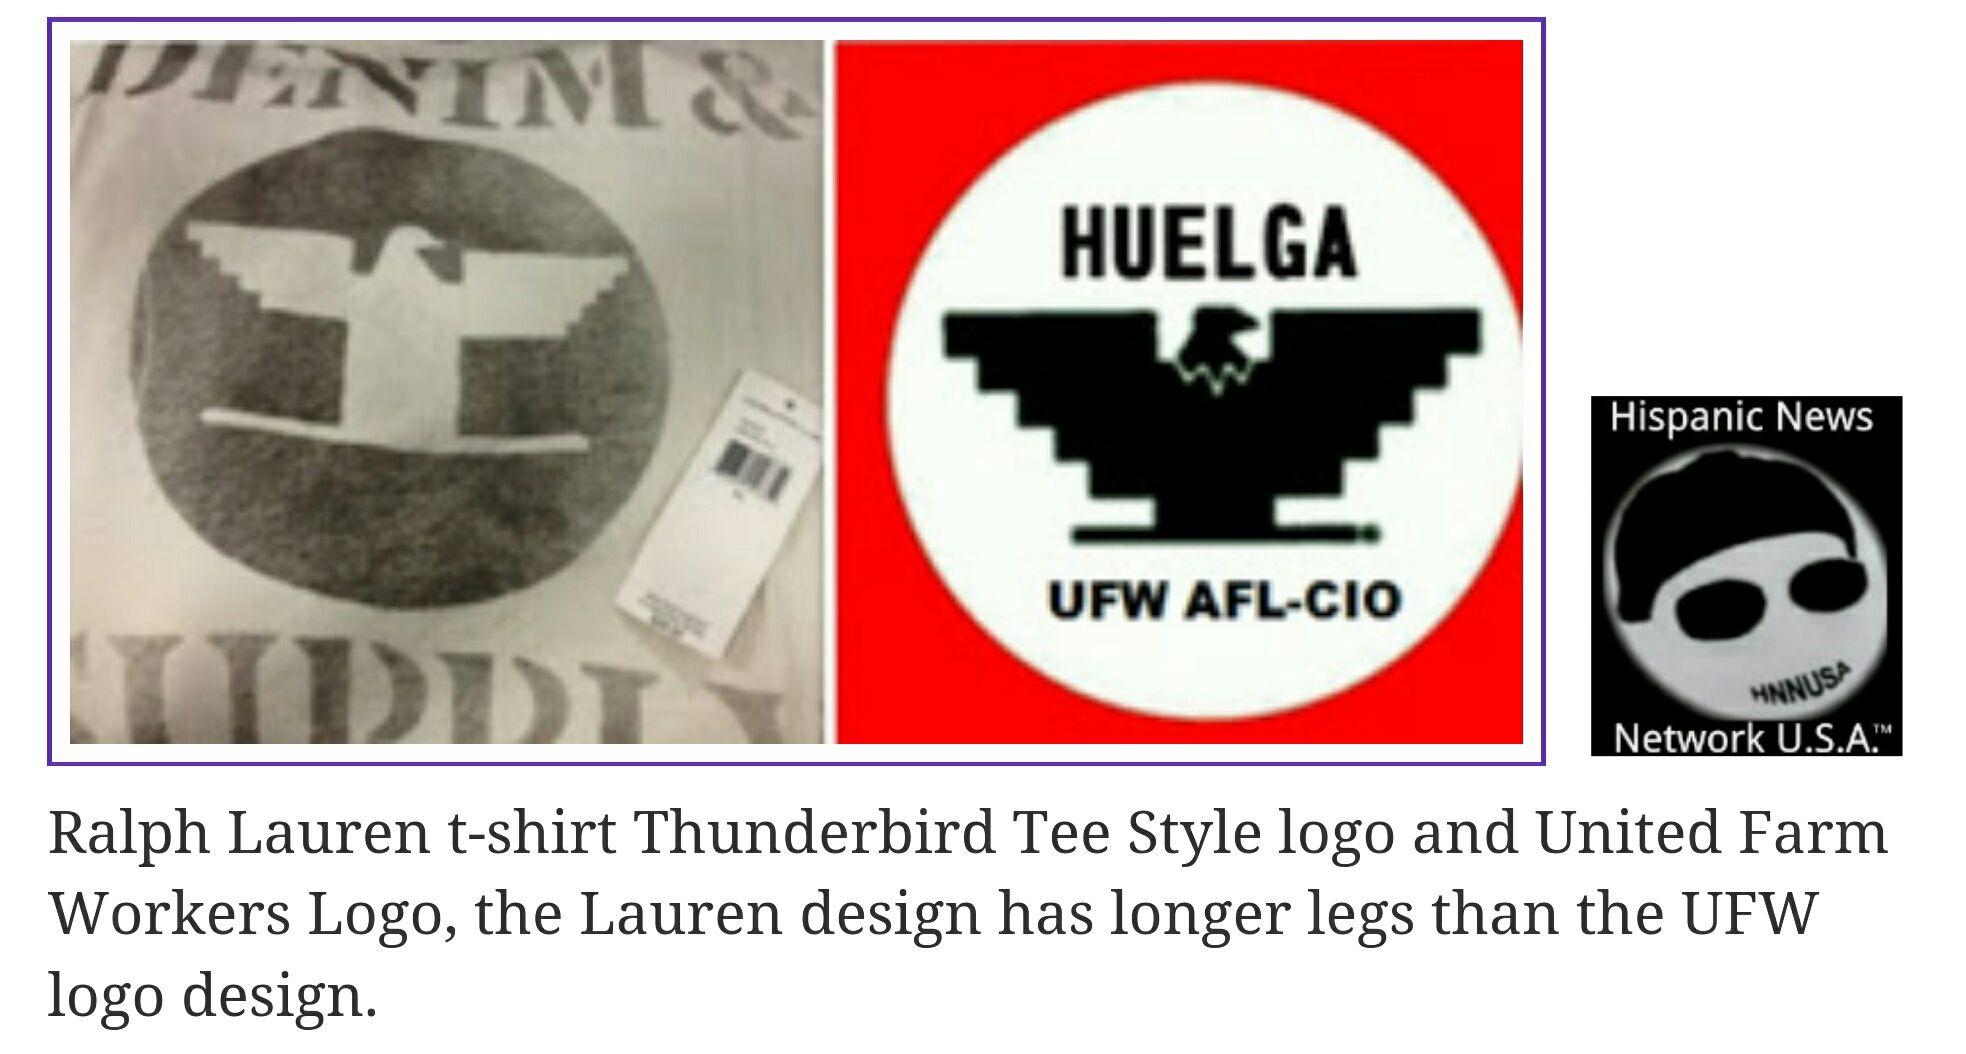 Discontinued Logo - Ralph Lauren Discontinued Use Of Thunderbird Logo On T-shirts ...